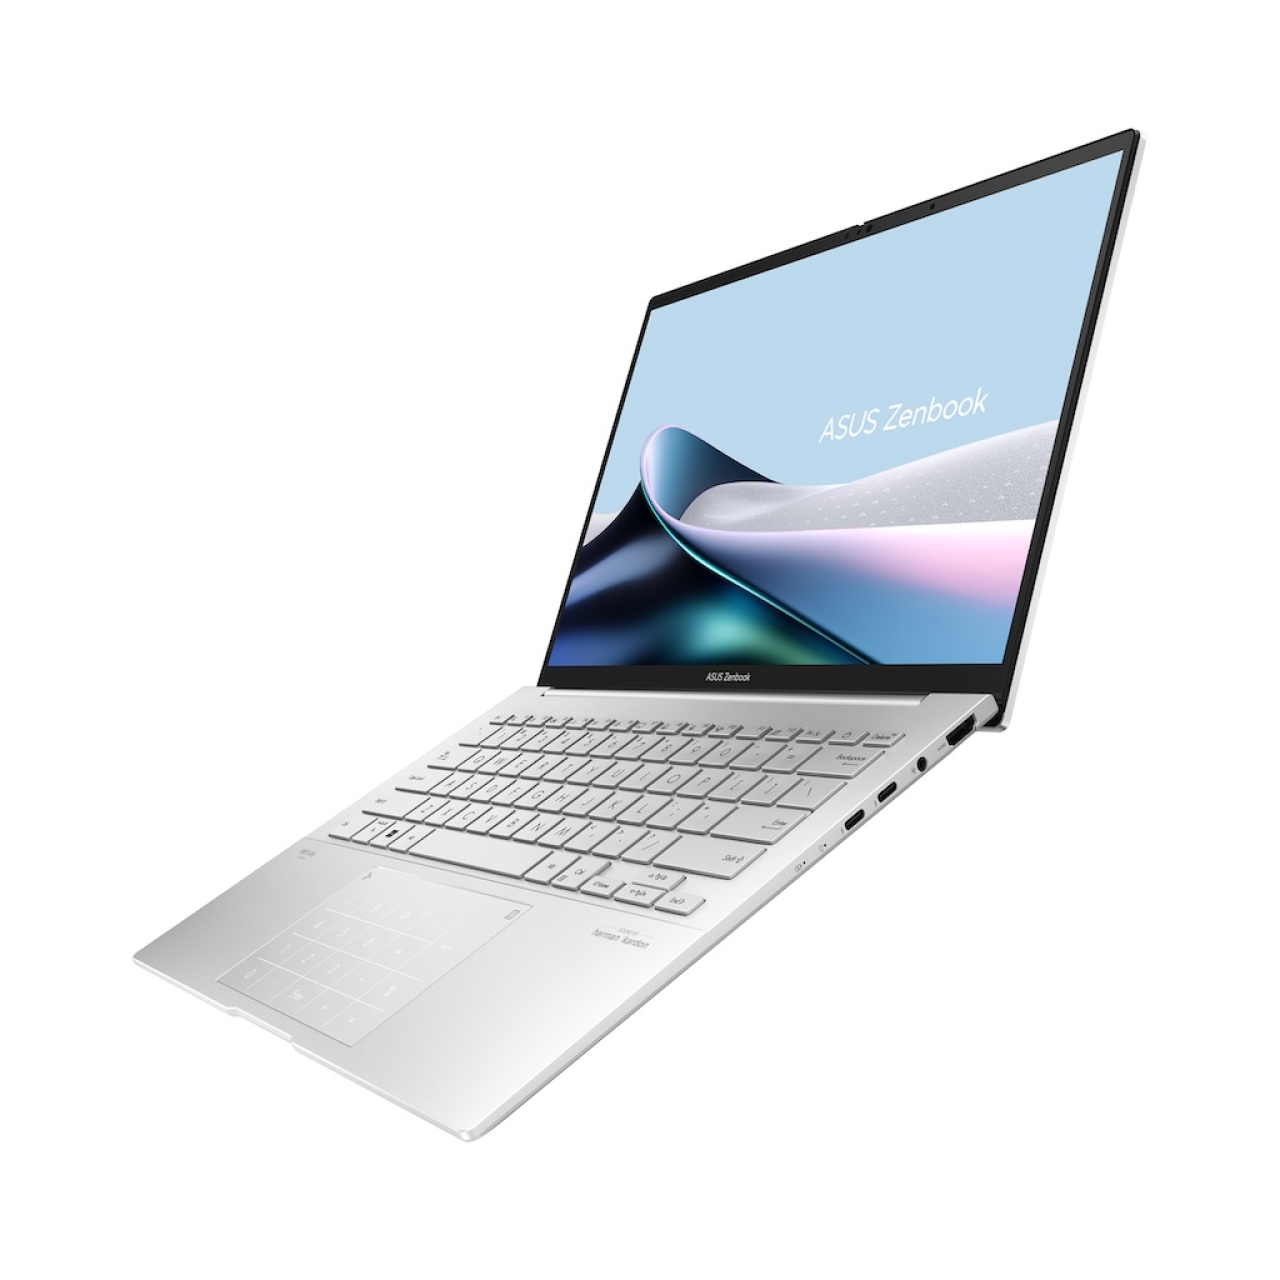 iTWire - ASUS ZenBook 14 OLED now available in Australia